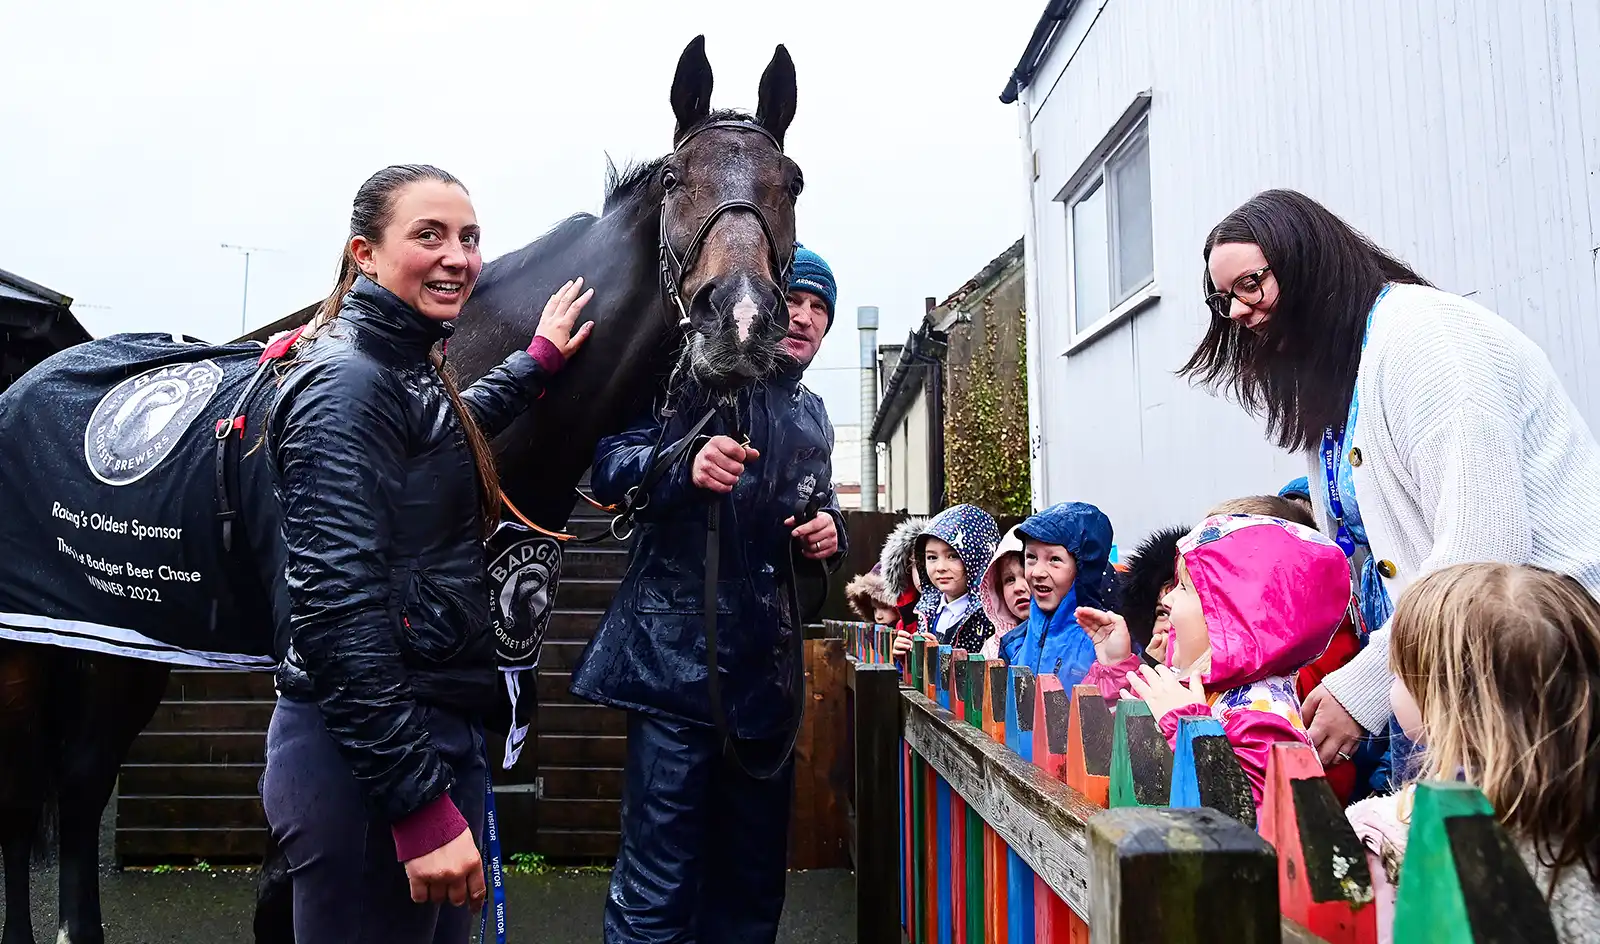 Pupils got to get up close to the superstar racehorse